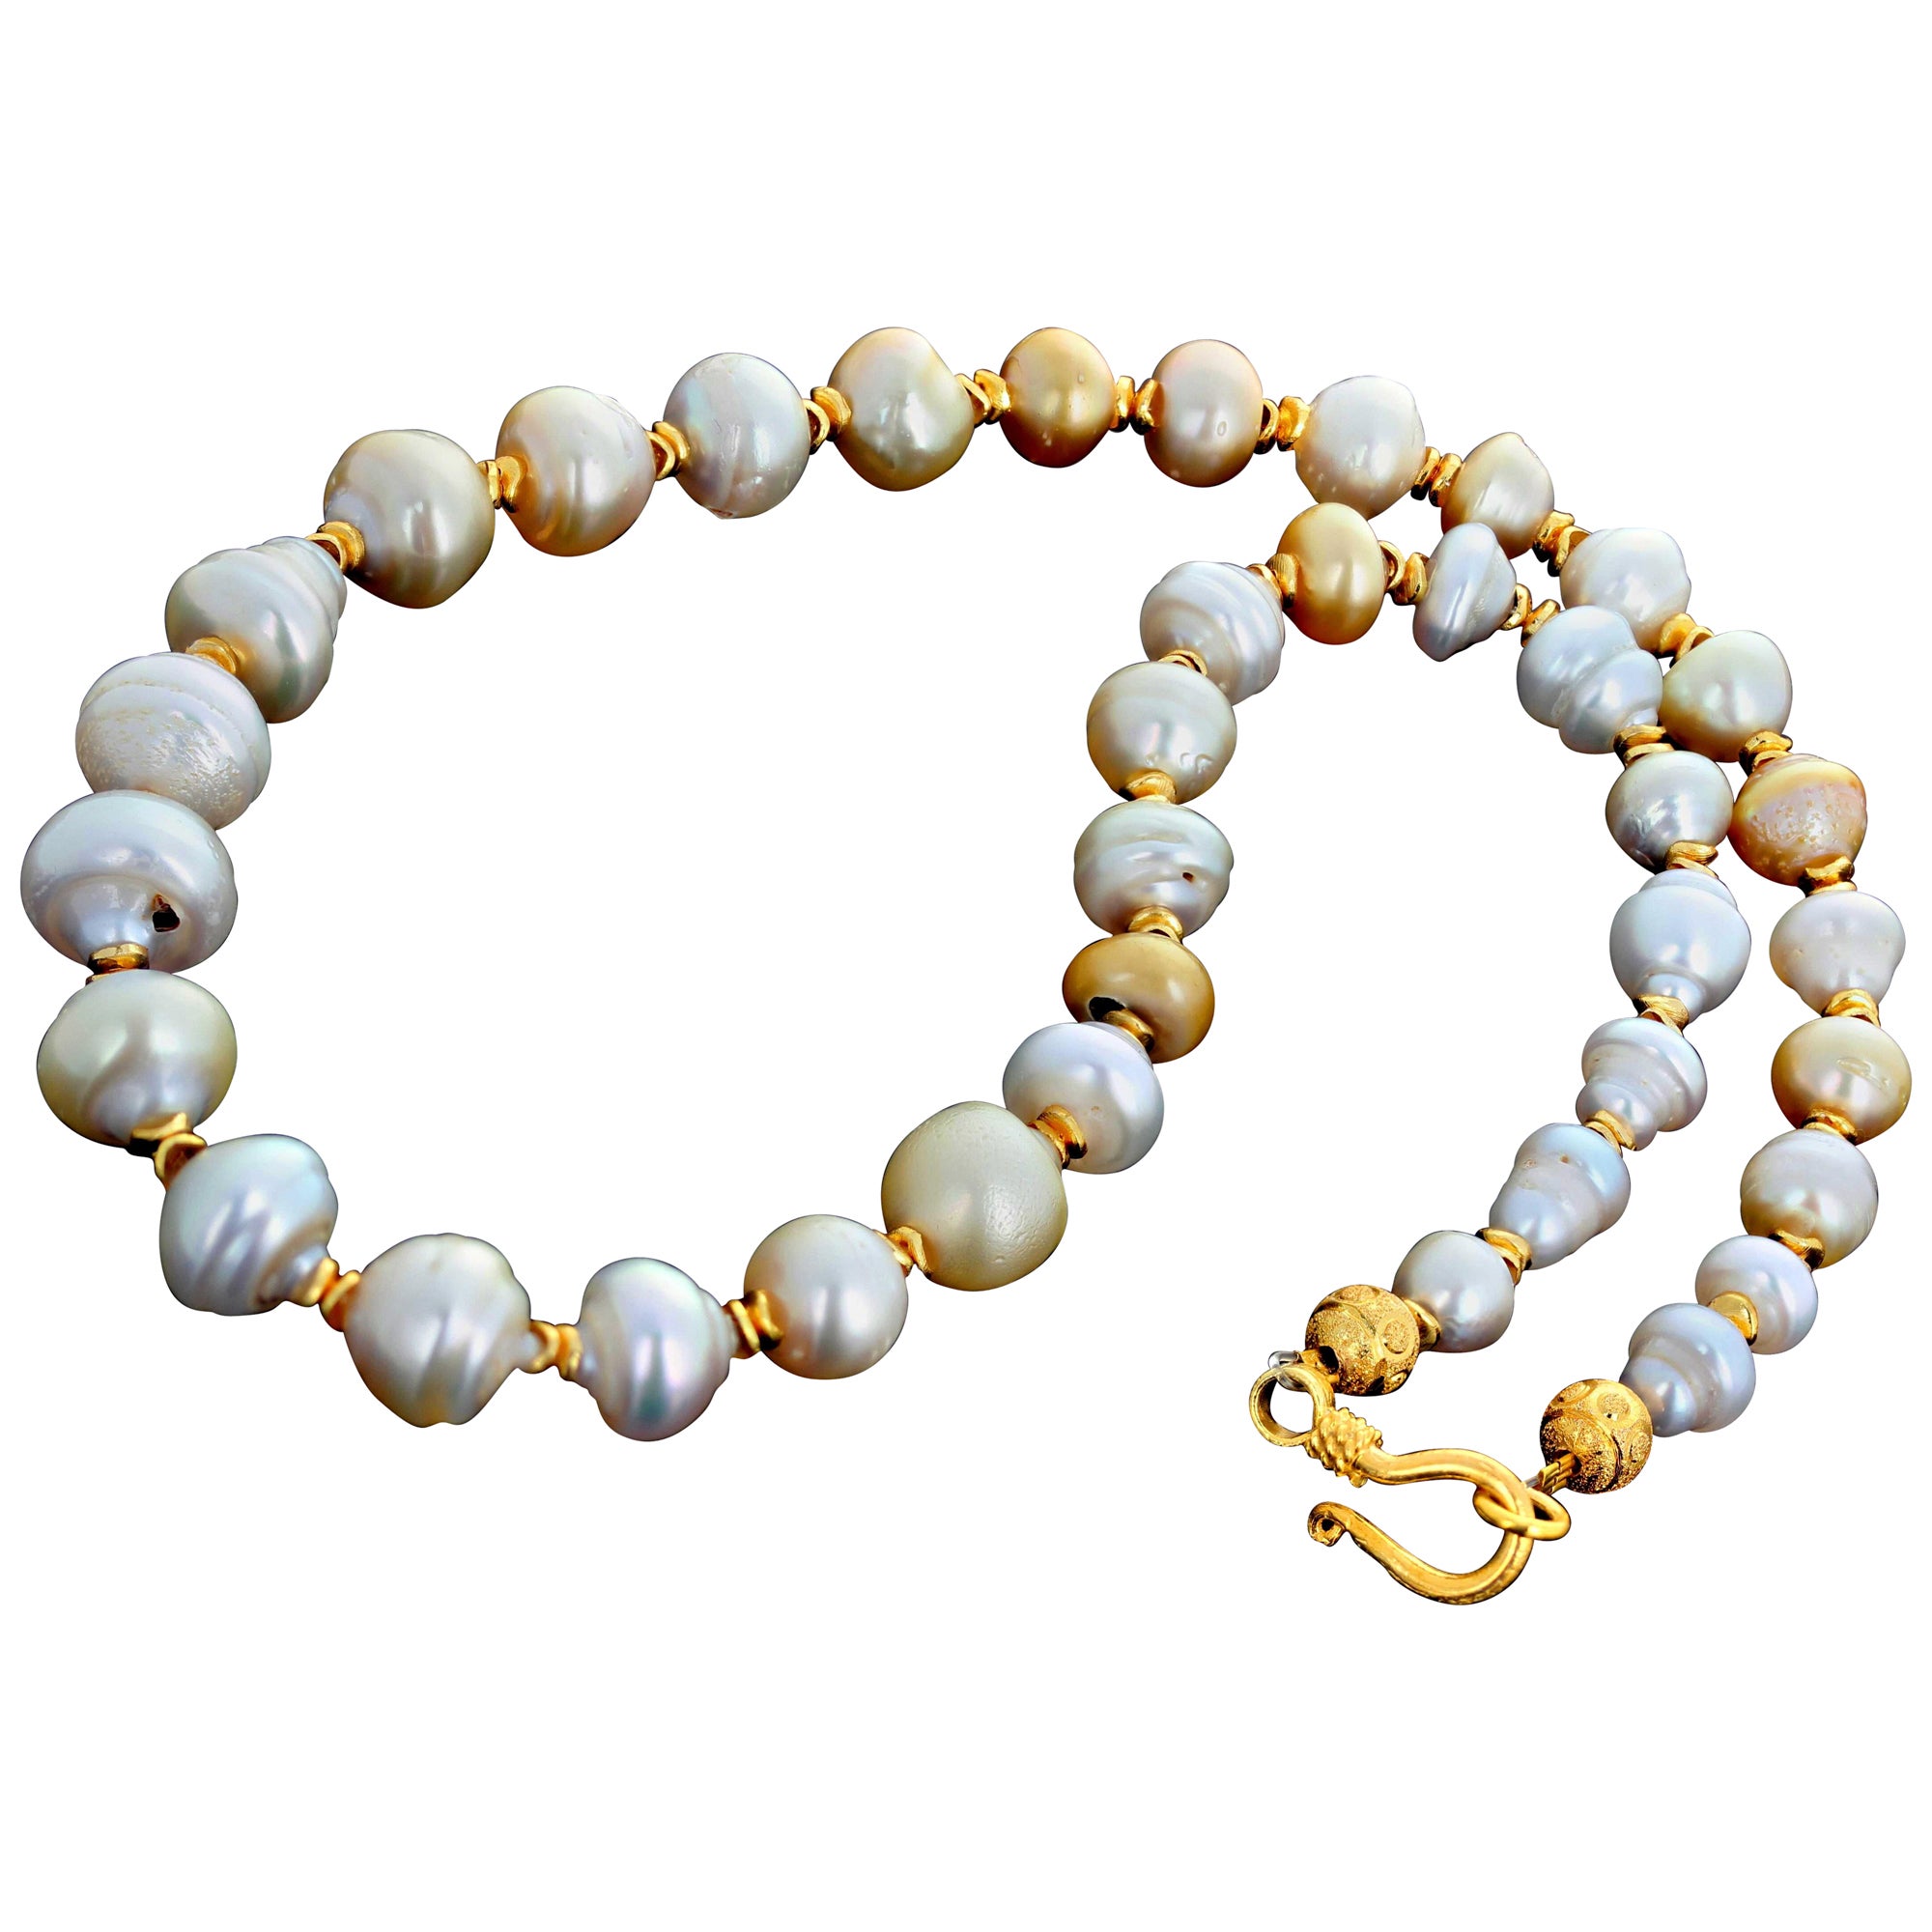 Absolutely gorgeous natural real Tahitian Ocean Pearls  create this magnificent Pearl necklace.  The largest Pearl is 14.8mm.  The gold plated spacers enhance the glowing of all of the slightly different colors of these beautiful white/creamy/gold